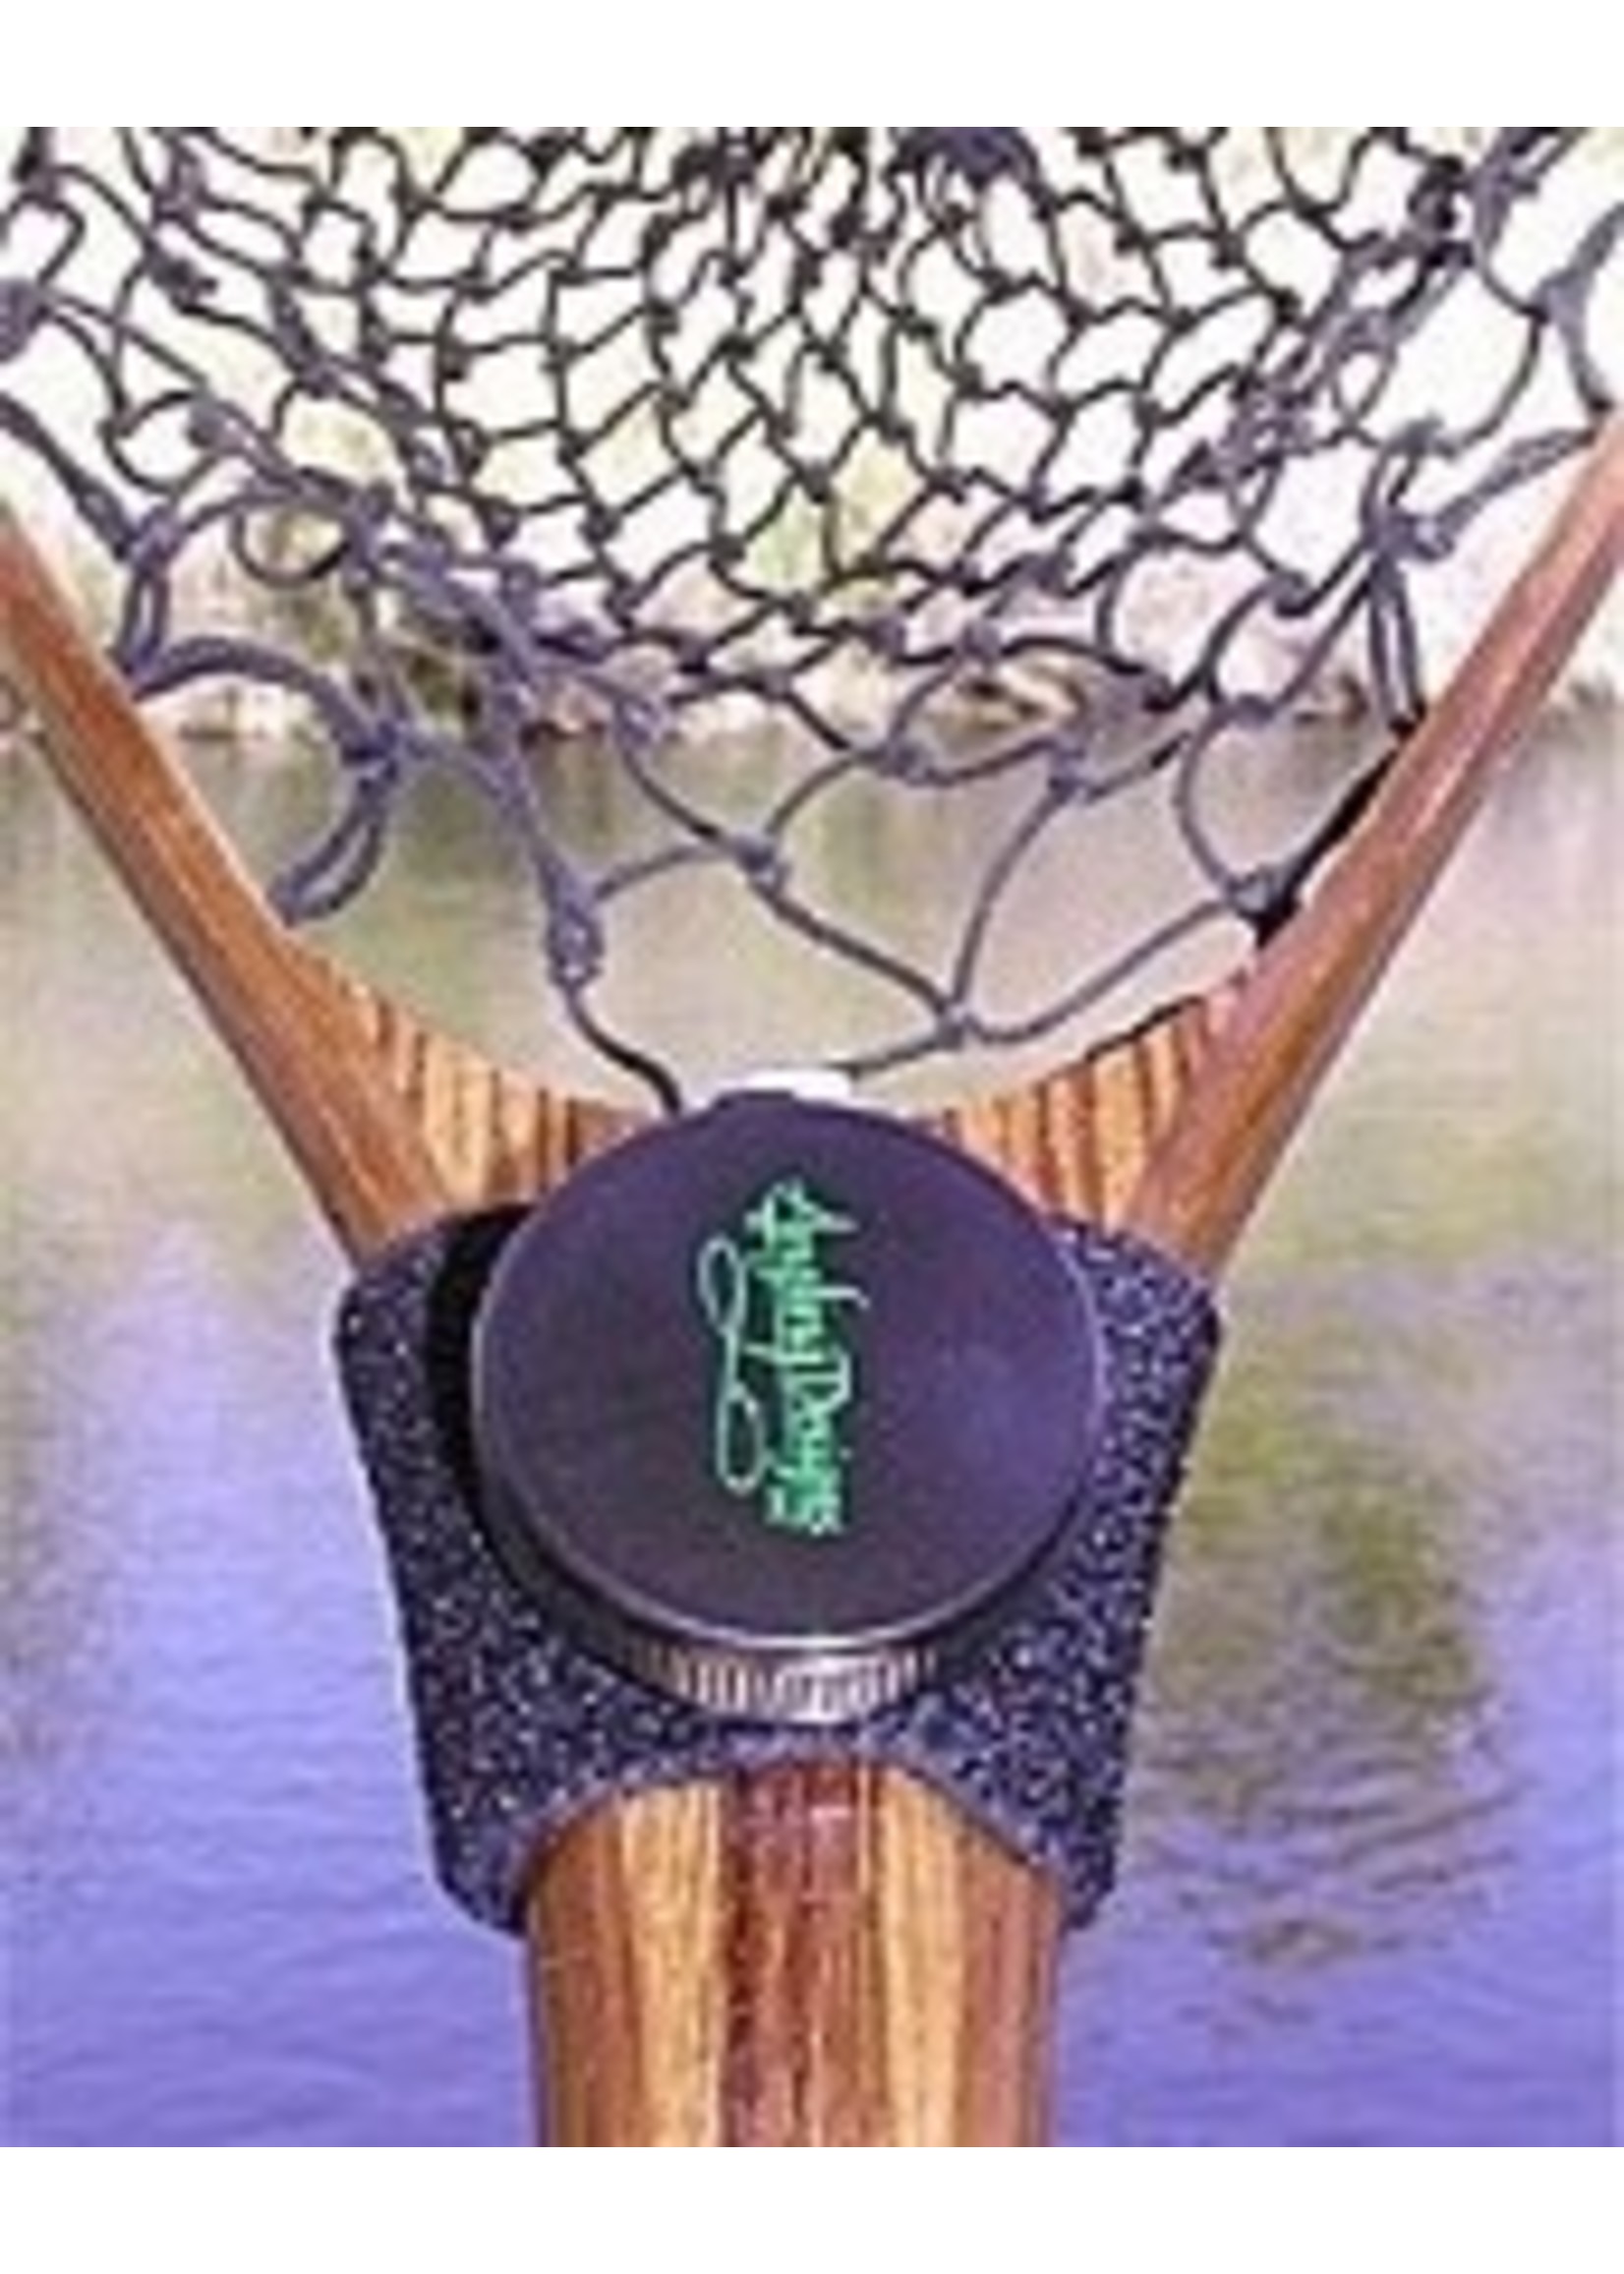 The Handi-Measure for Fly Fishing Net - Ed's Fly Shop